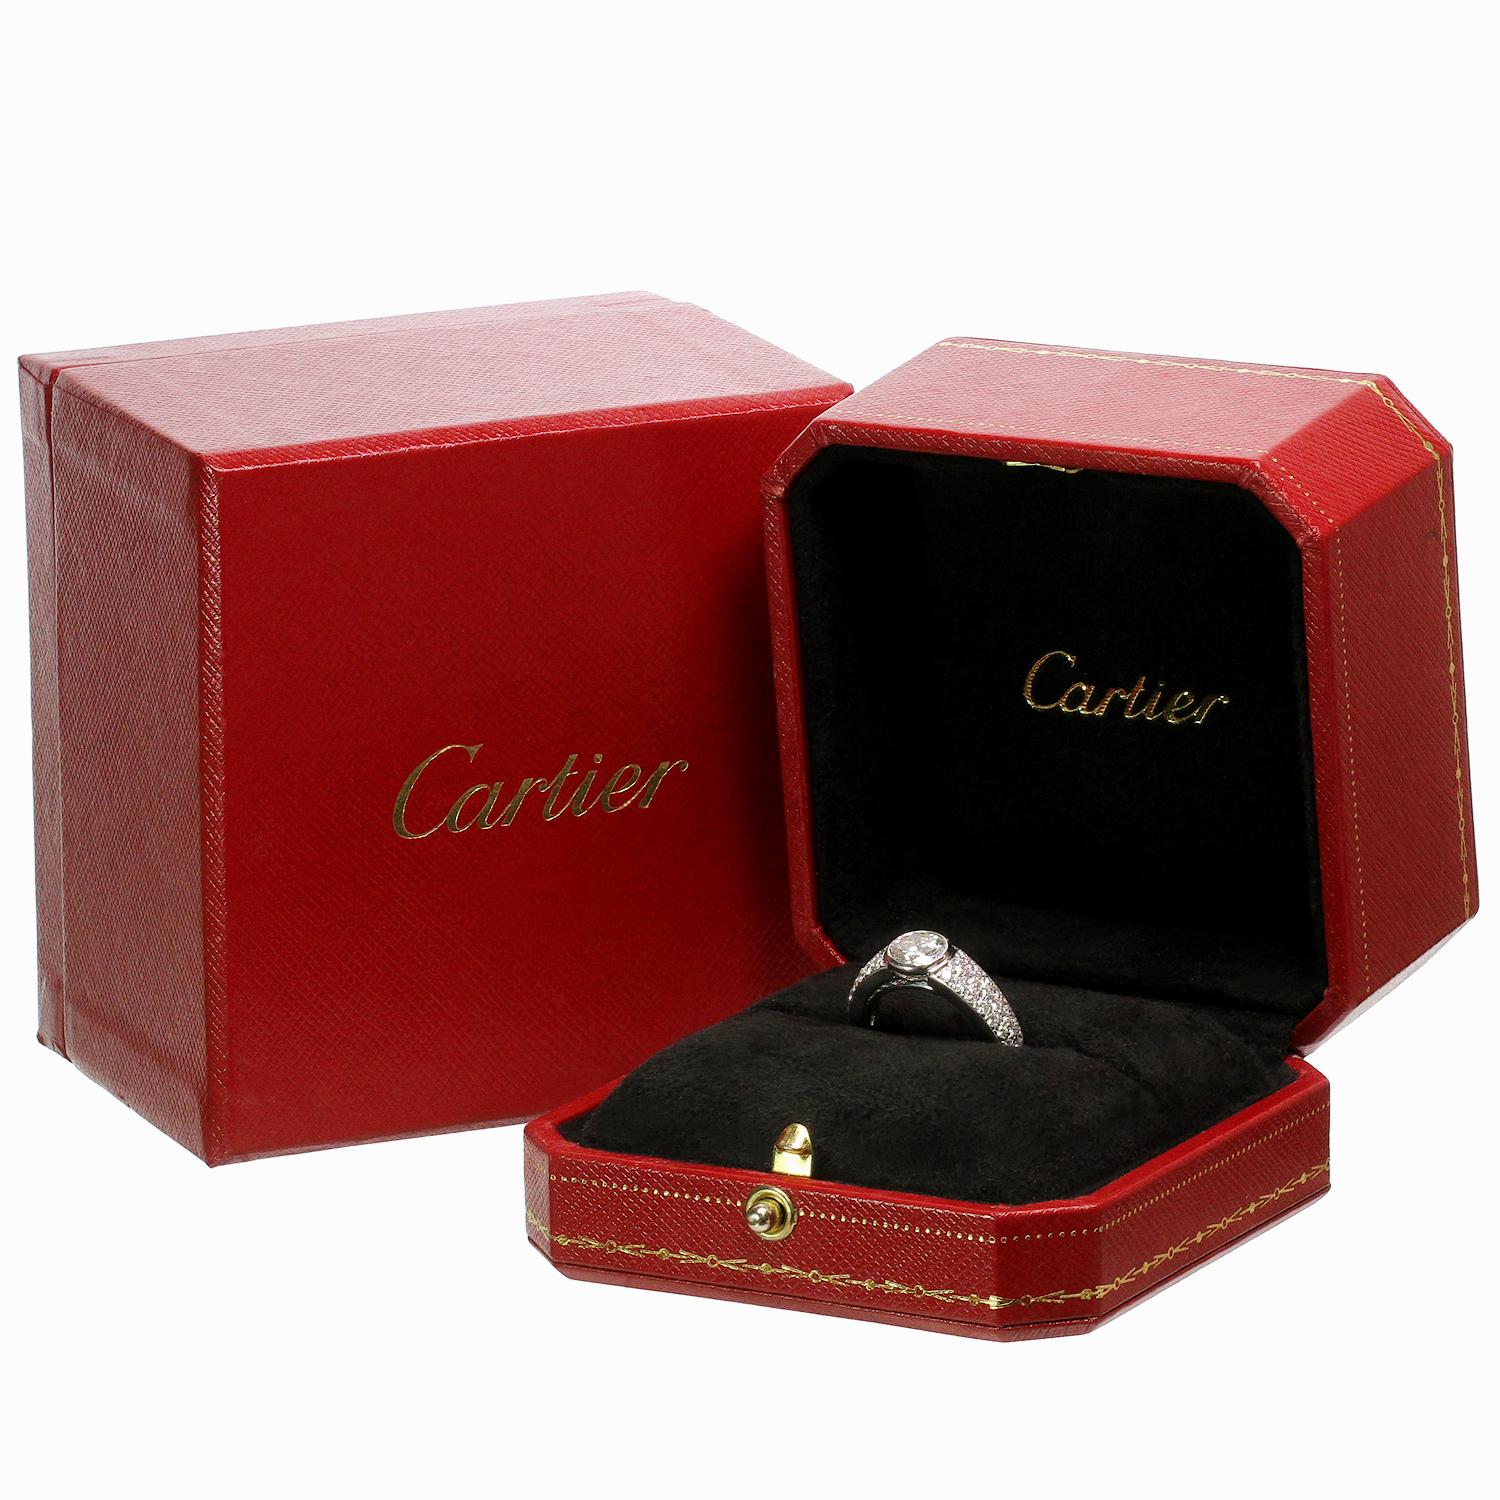 This exquisite Cartier ring is crafted in 18k white gold and features a solitaire 1.01 carat brilliant-cut round diamond in a bezel-setting surrounded with 42 pave-set brilliant-cut round diamonds weighing an estimated 0.52 carats.  Completed with